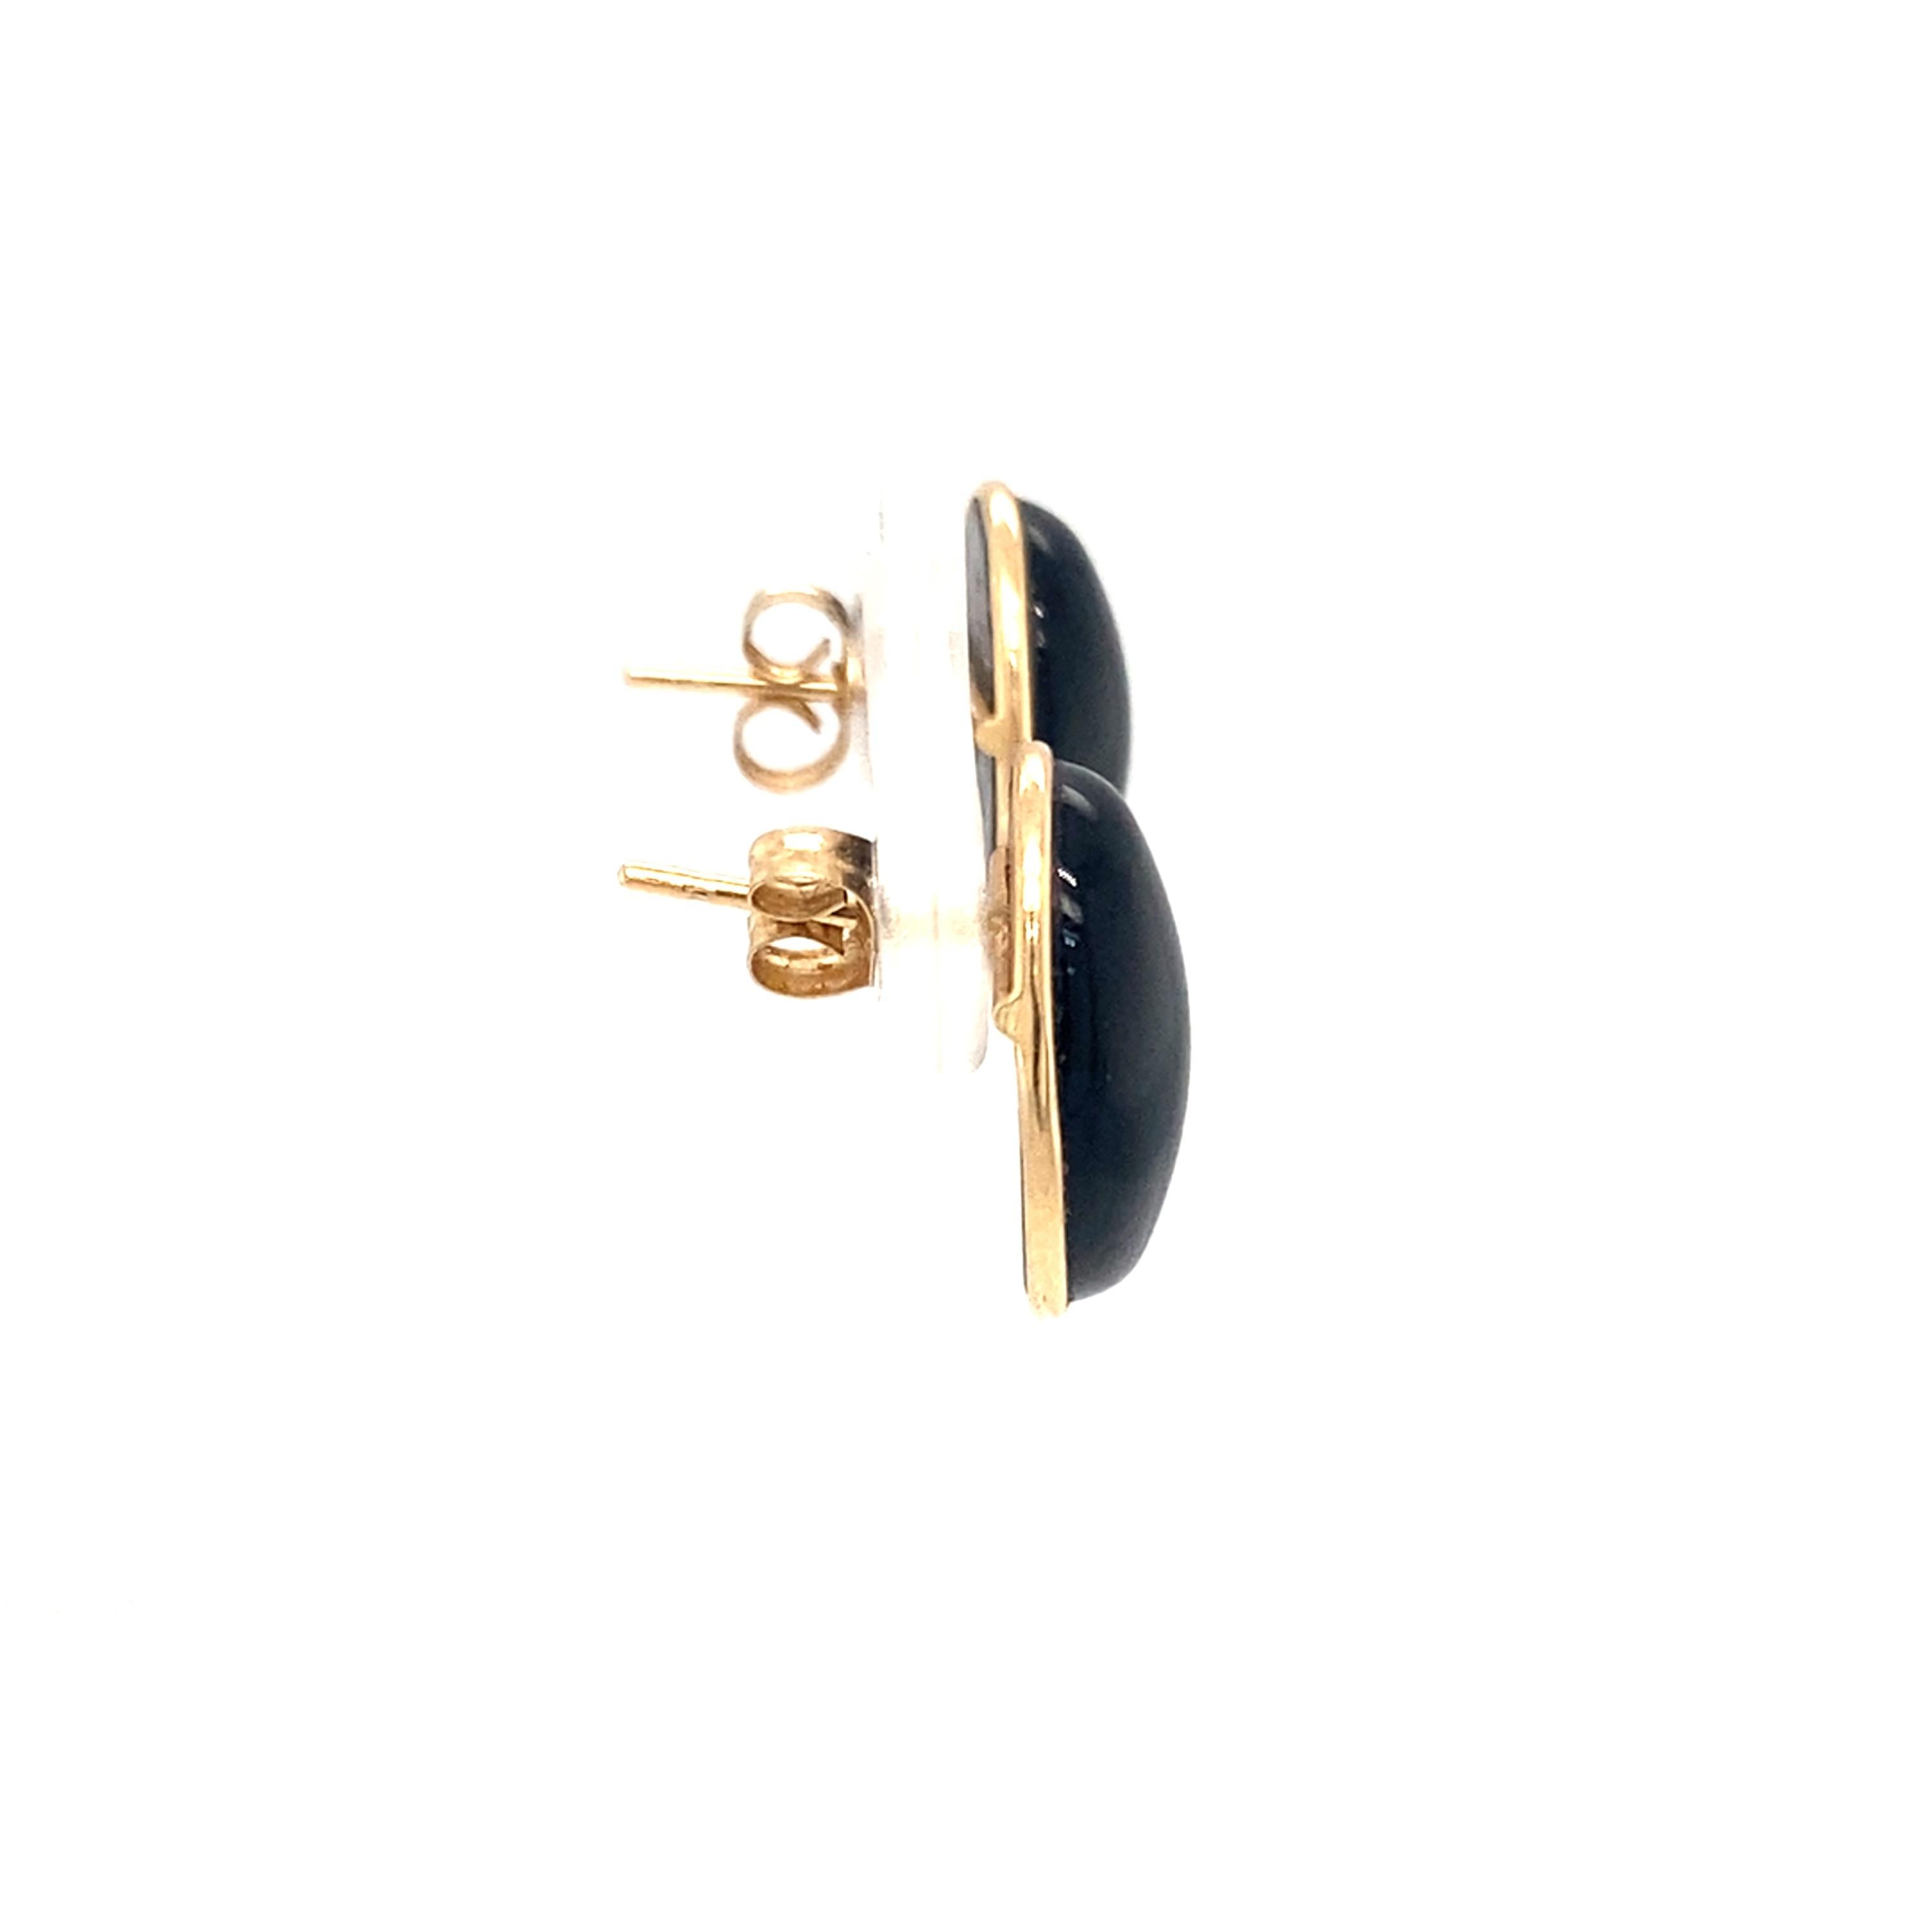 Contemporary 1950s Onyx Stud Earrings in 14 Karat Yellow Gold